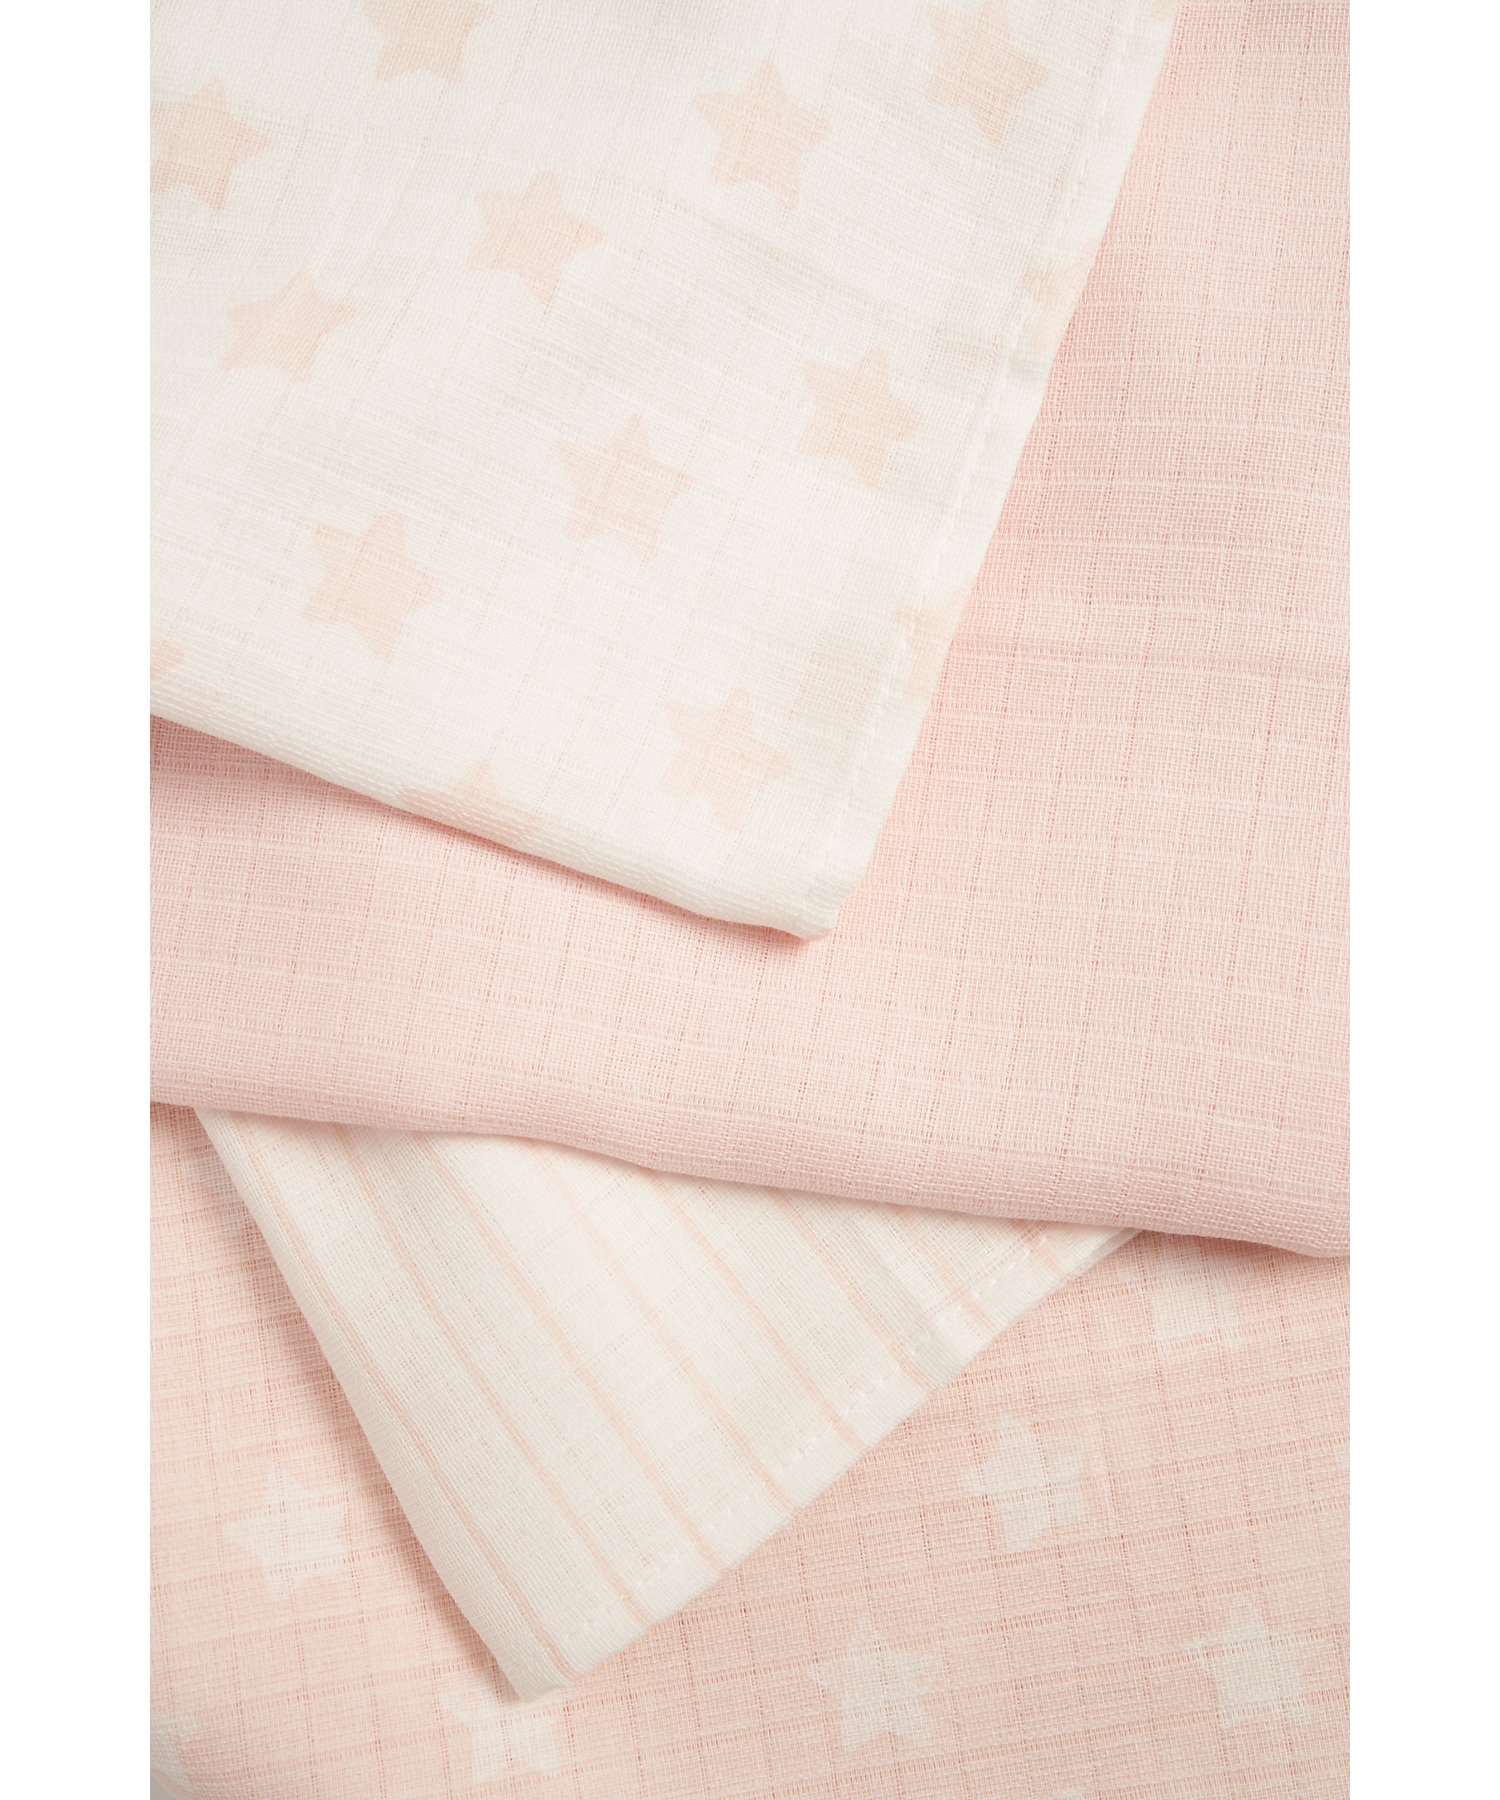 Mothercare | Mothercare Essential Muslins Pink Pack of 6 5